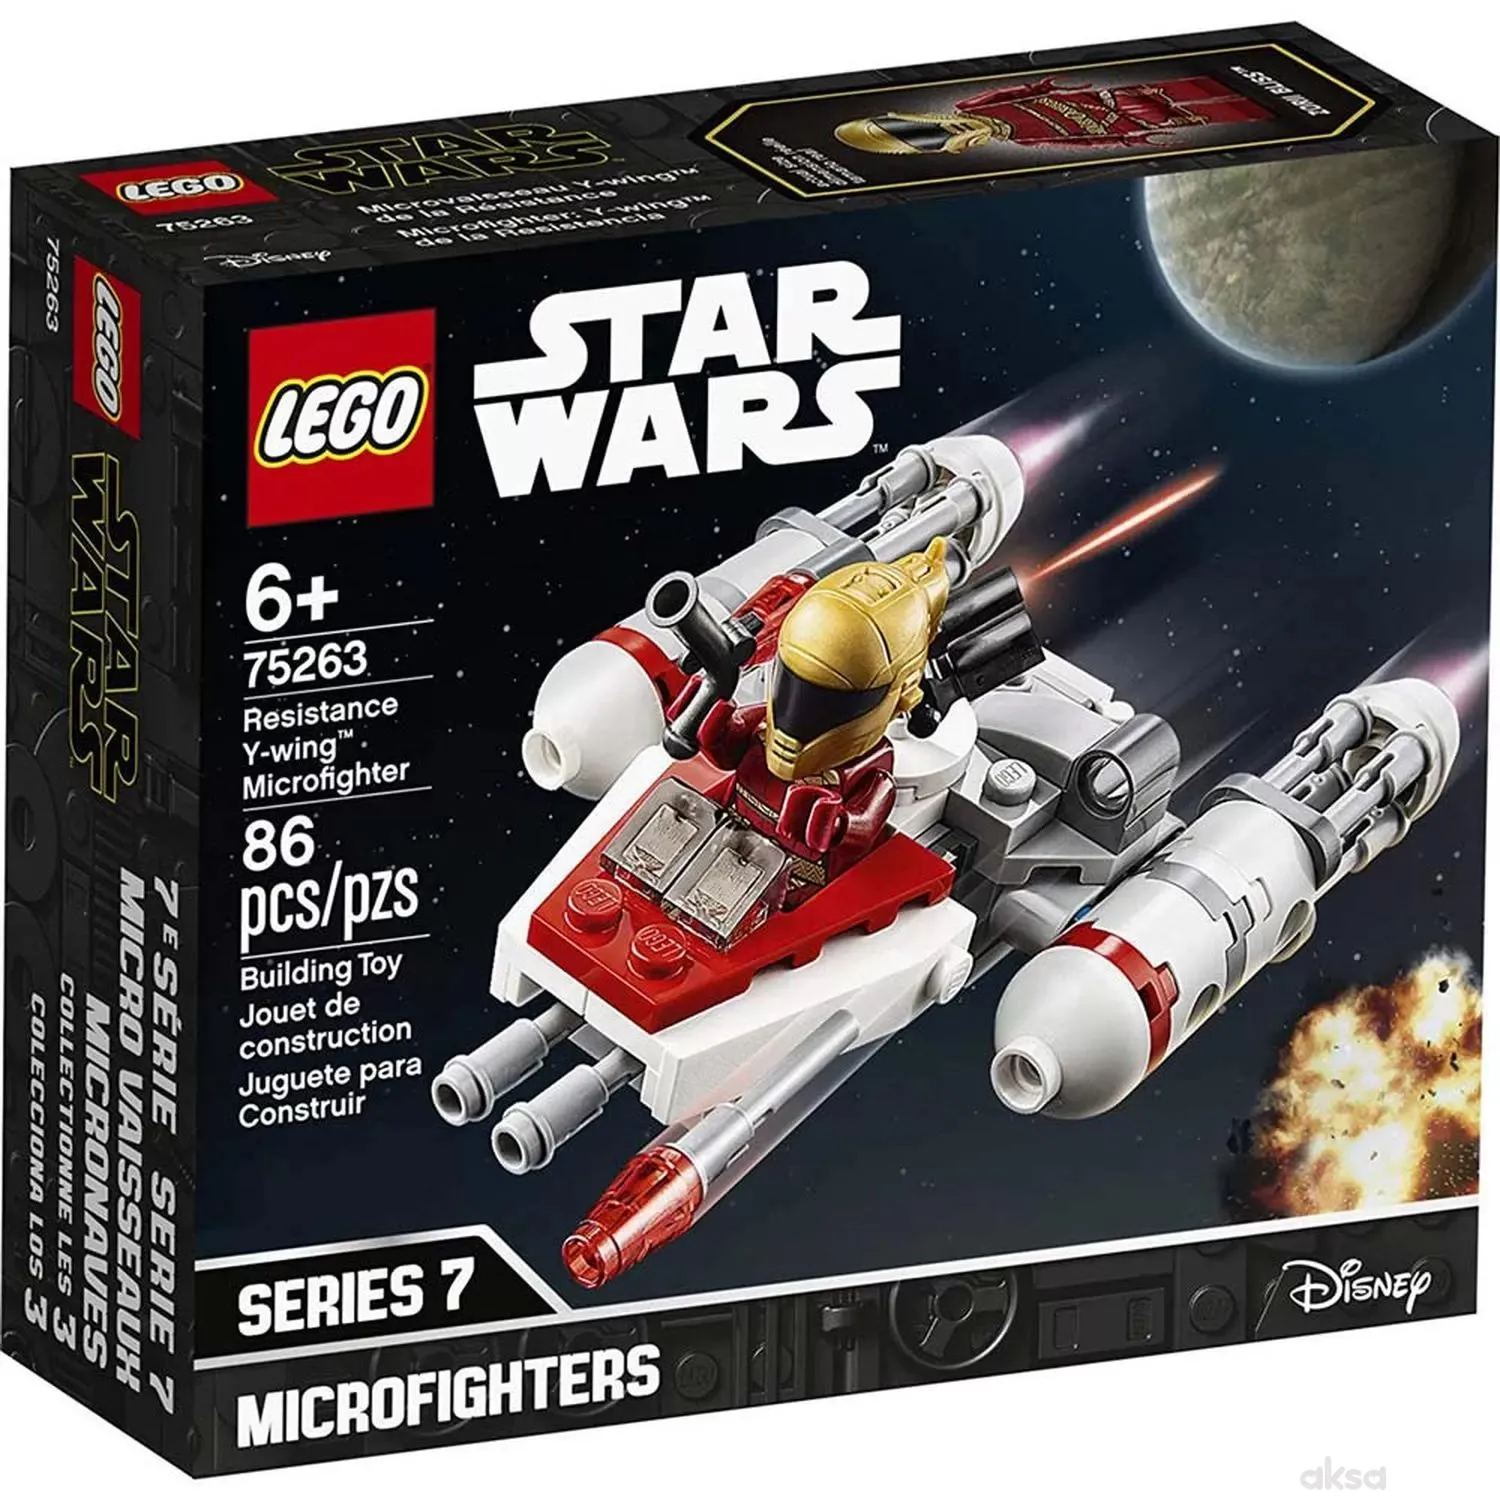 Lego Star Wars resistance y-wing microfighter 